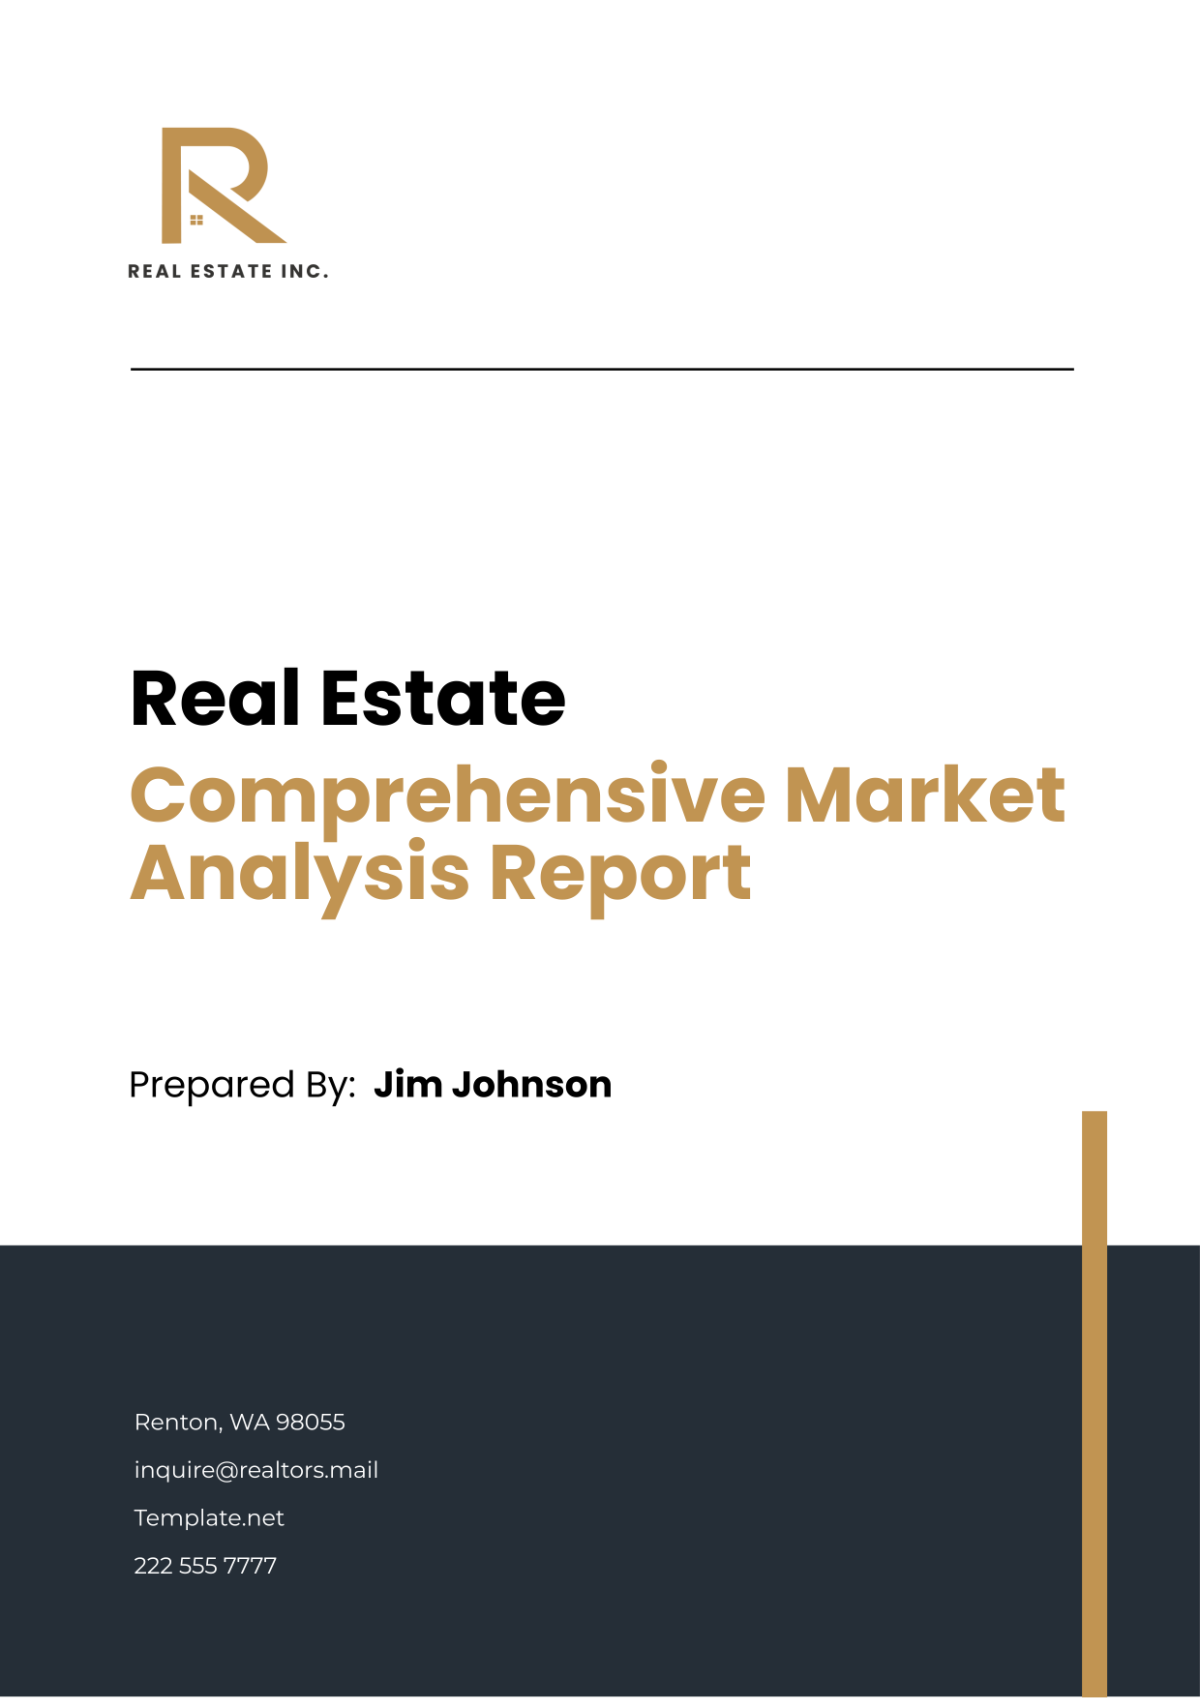 Real Estate Comprehensive Market Analysis Report Template